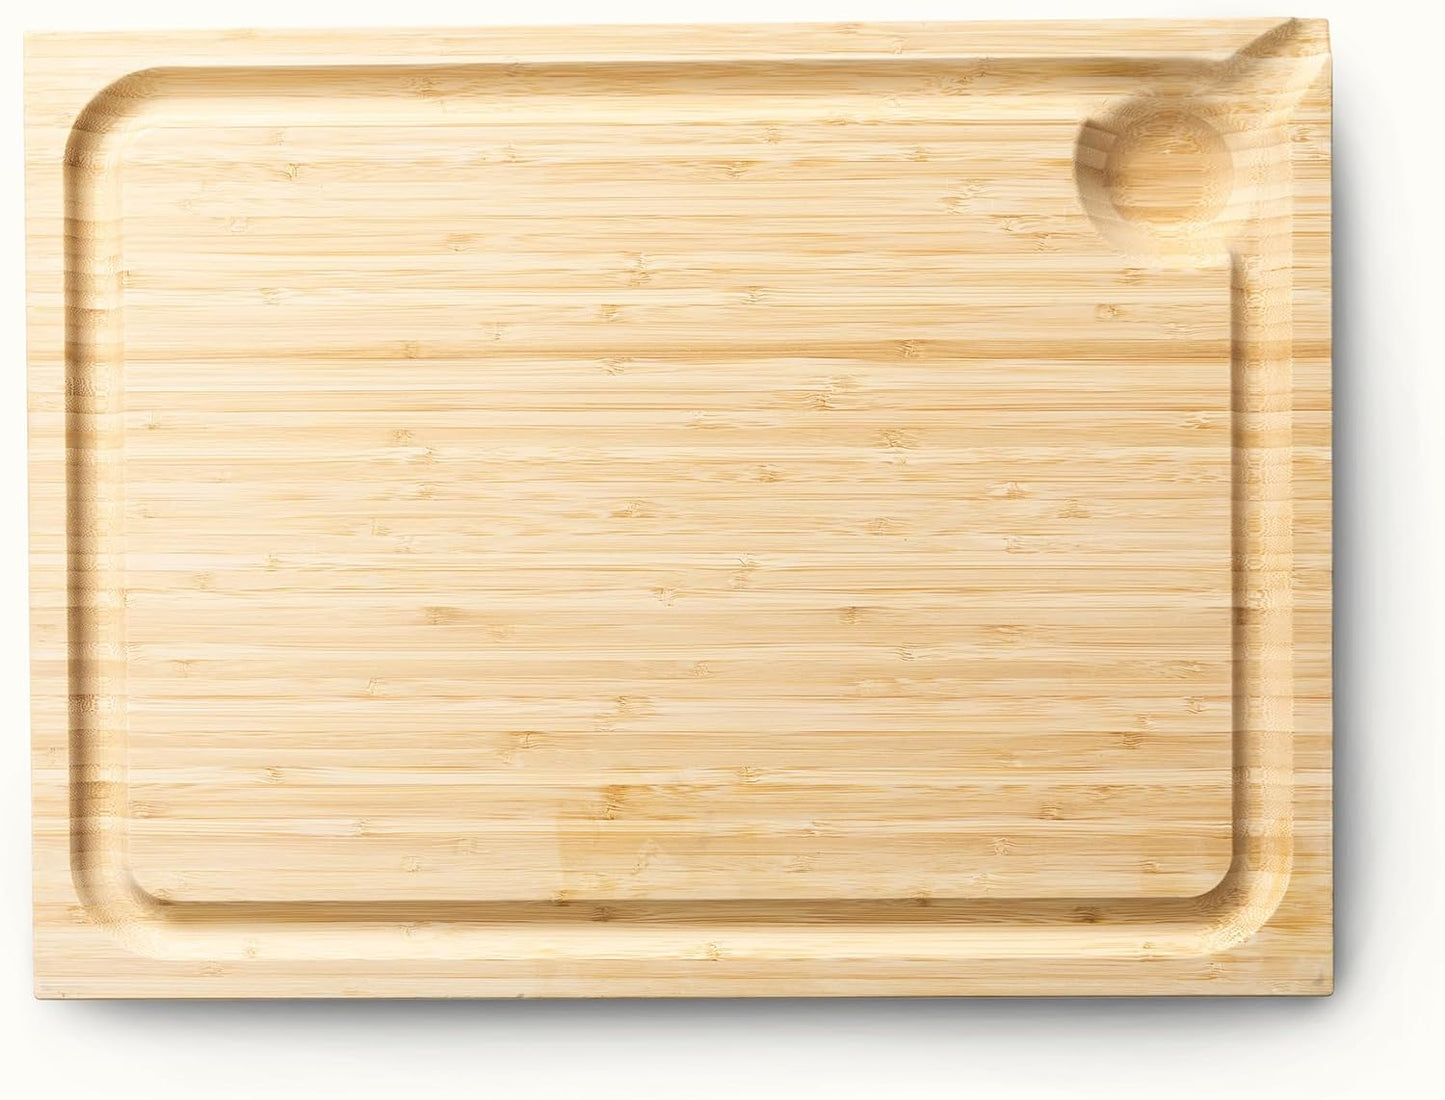 100% Bamboo Kitchen Cutting Board | The 19.6" x 14.9"; for Chopping, Slicing, Carving, Mincing, Etc.